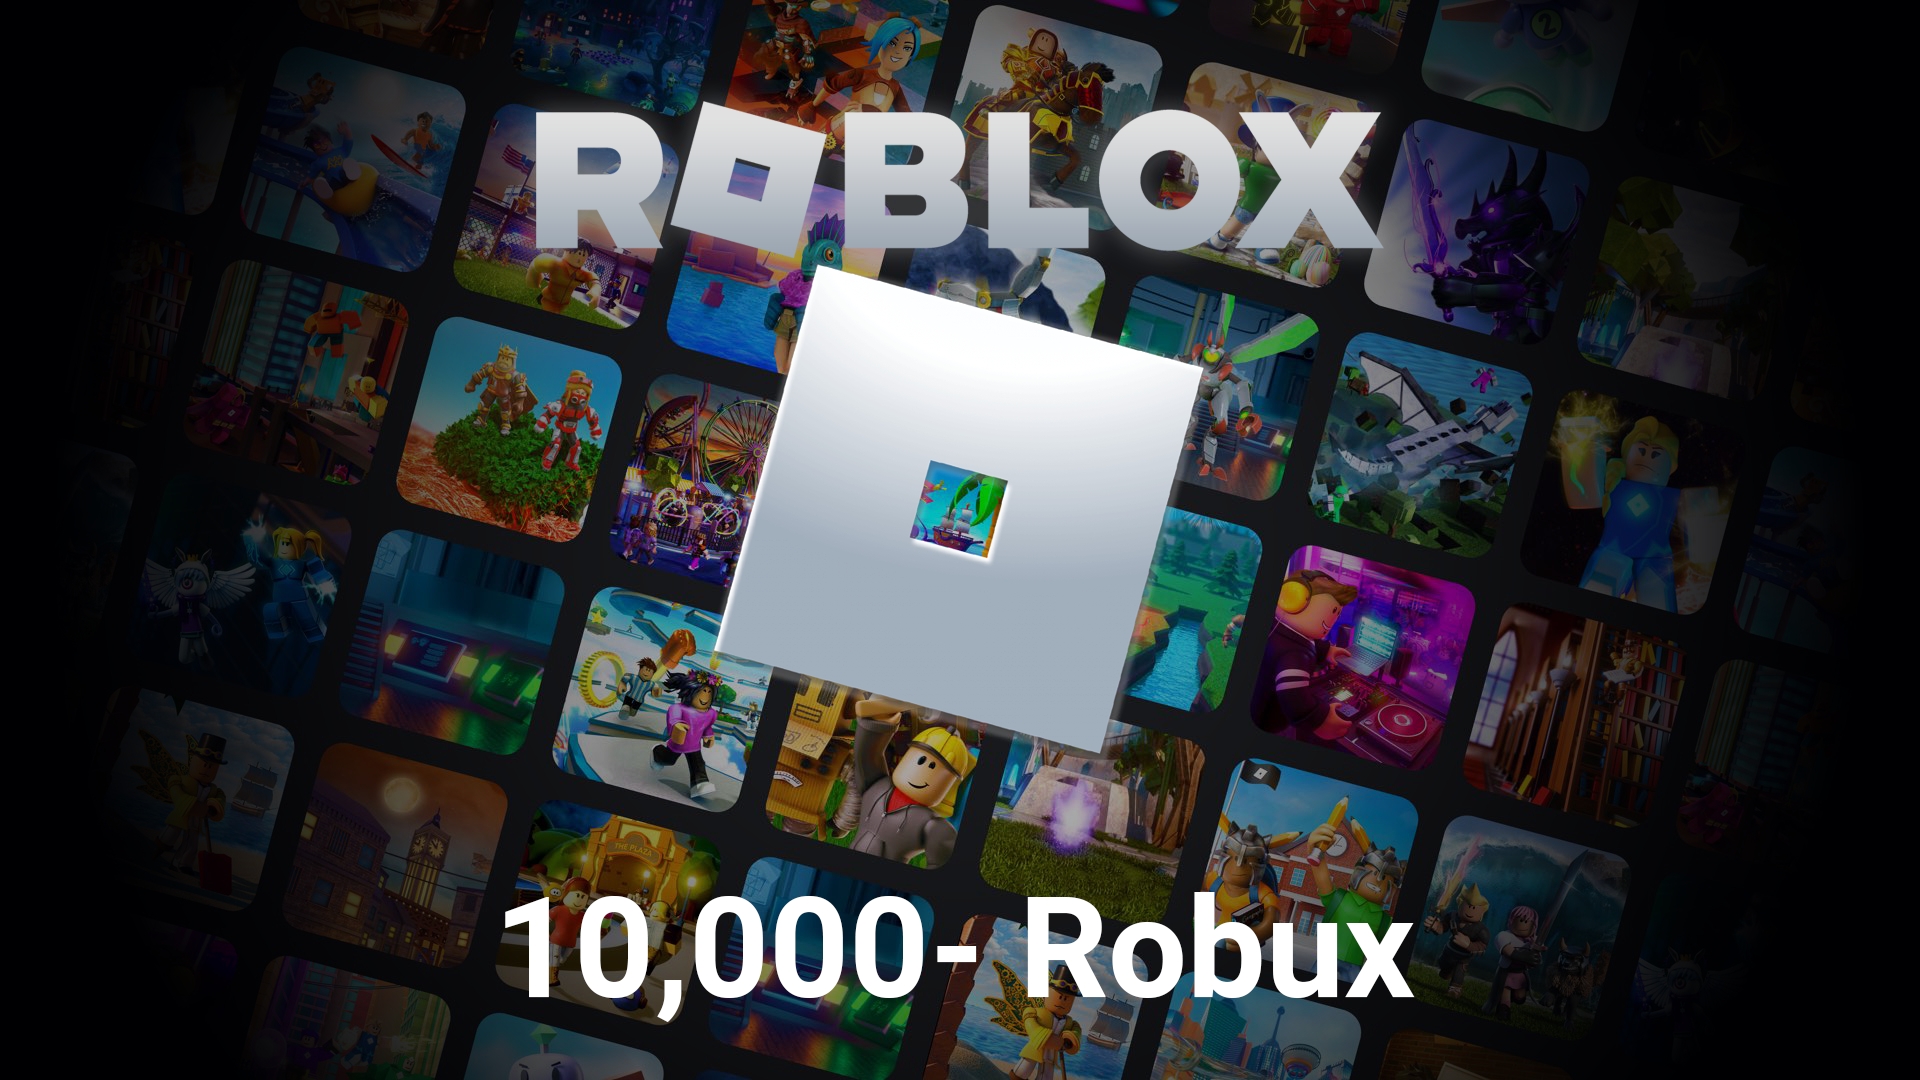 https://gaming-cdn.com/images/products/10435/orig/roblox-120-eur-10000-robux-10000-robux-pc-gioco-europe-cover.jpg?v=1687351808